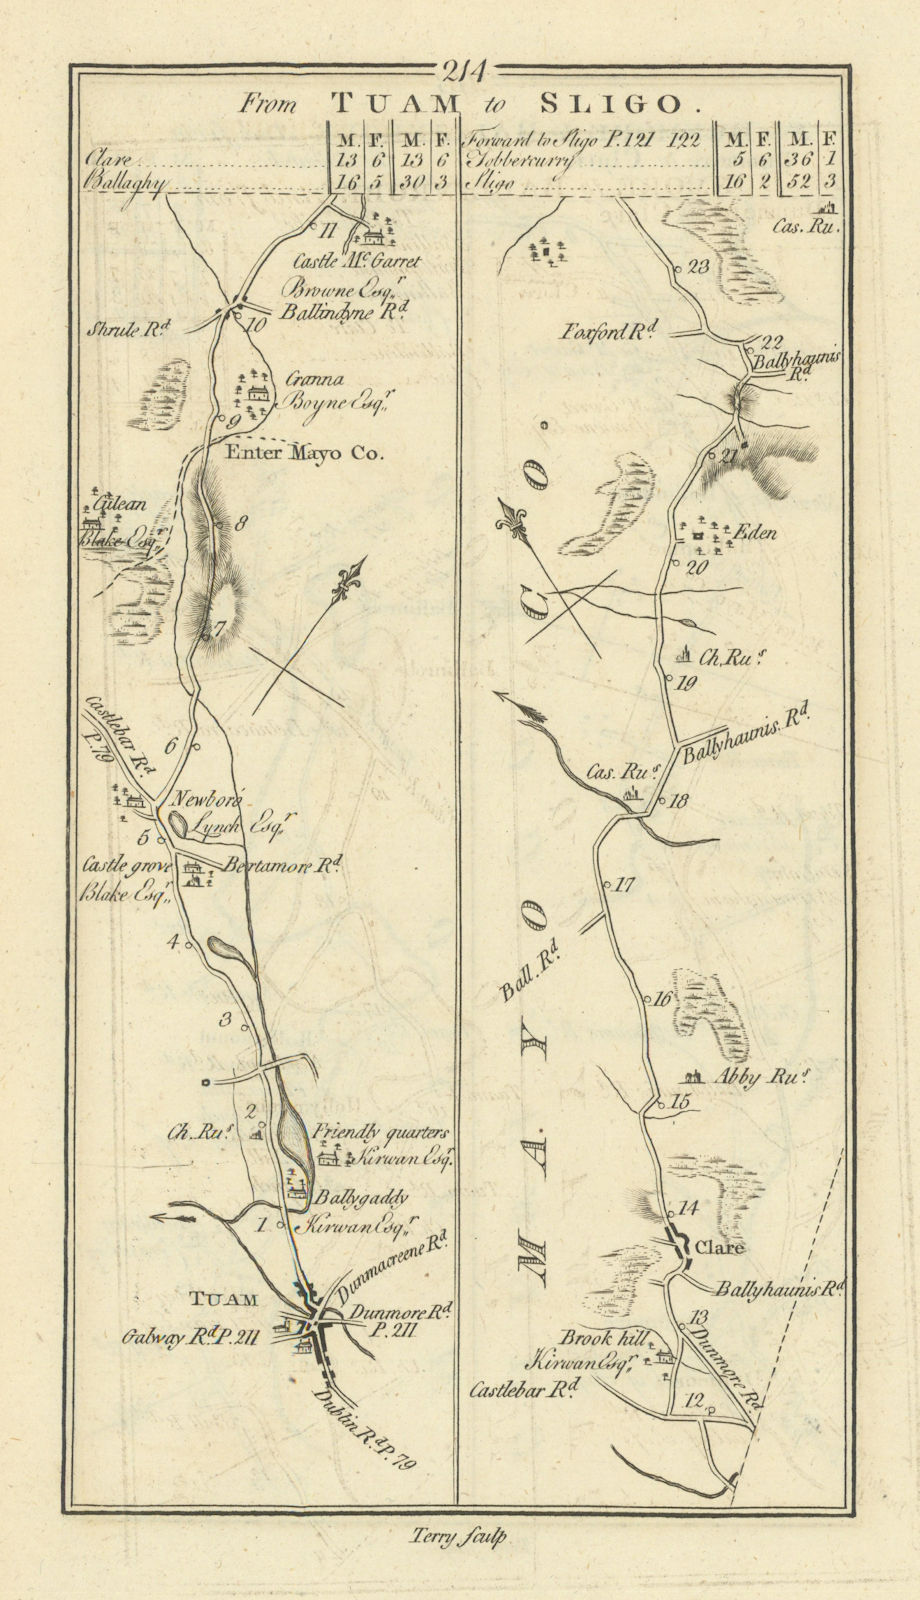 Associate Product #214 From Tuam to Sligo. Claremorris Galway Mayo. TAYLOR/SKINNER 1778 old map